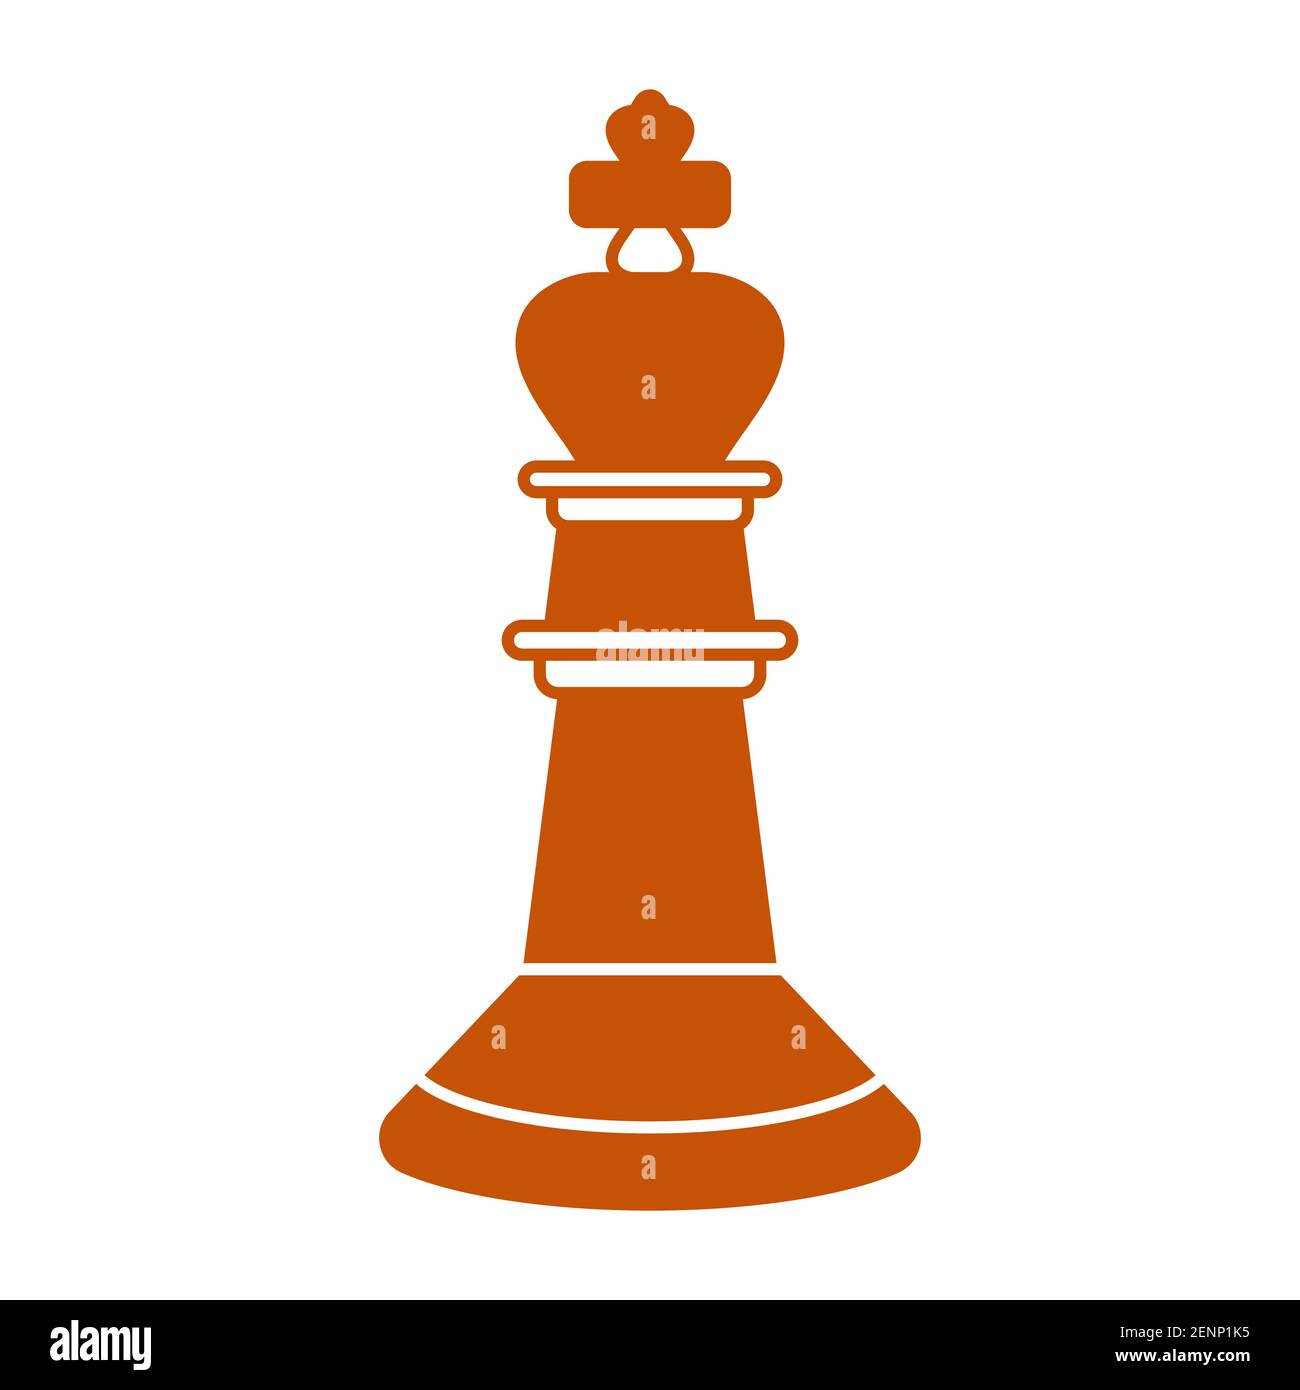 King chess piece flat color icon for apps or website Stock Vector